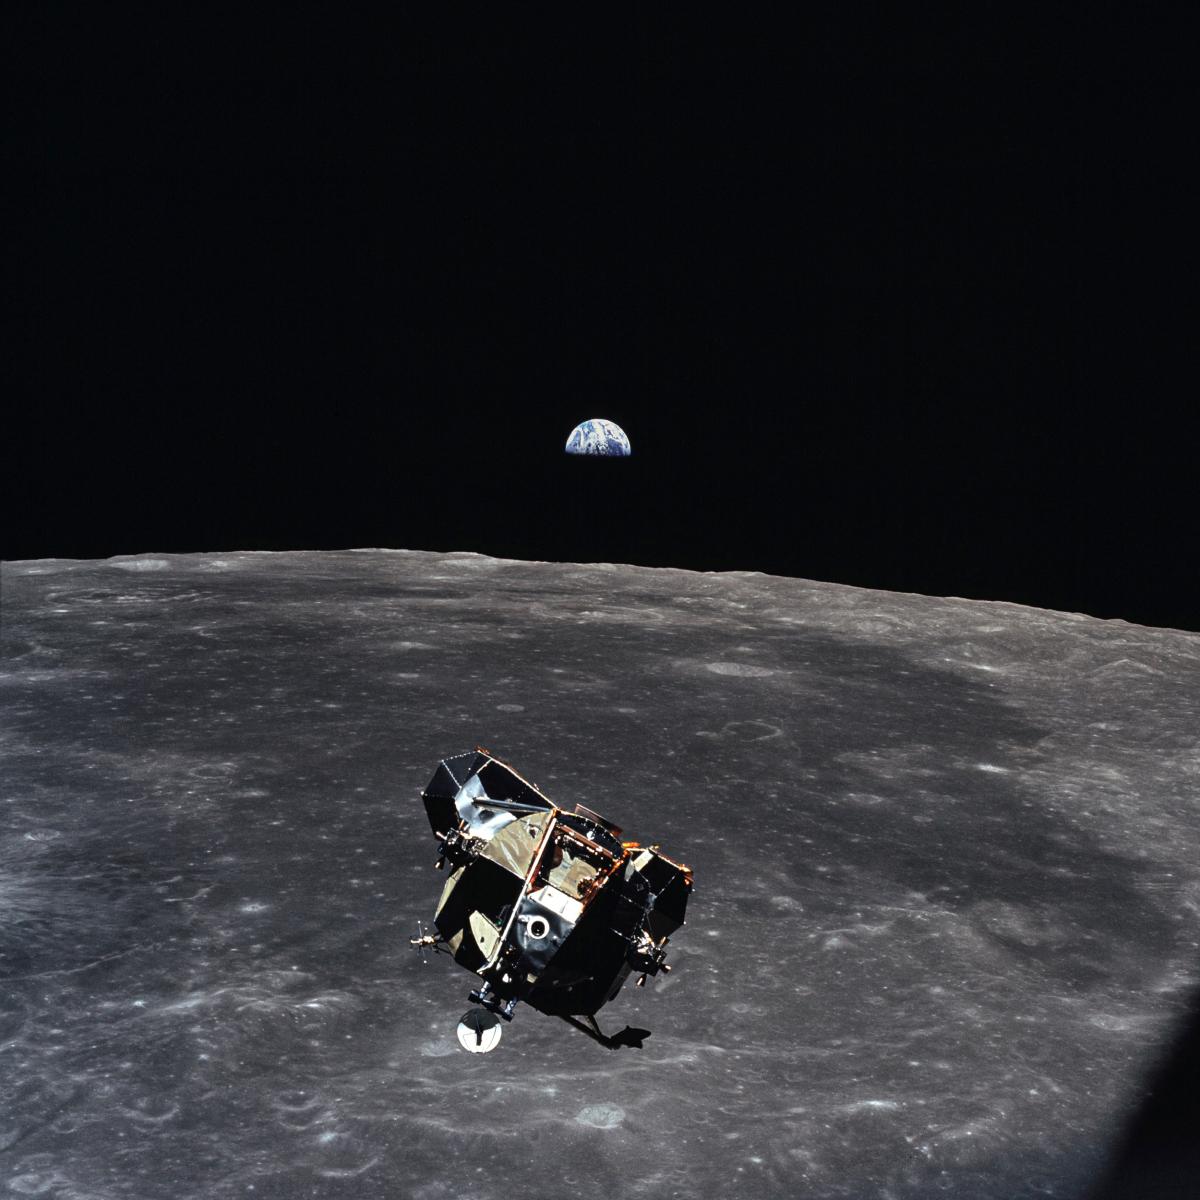 Apollo 11 Lunar Module returning to the Command Module from the surface of the moon.